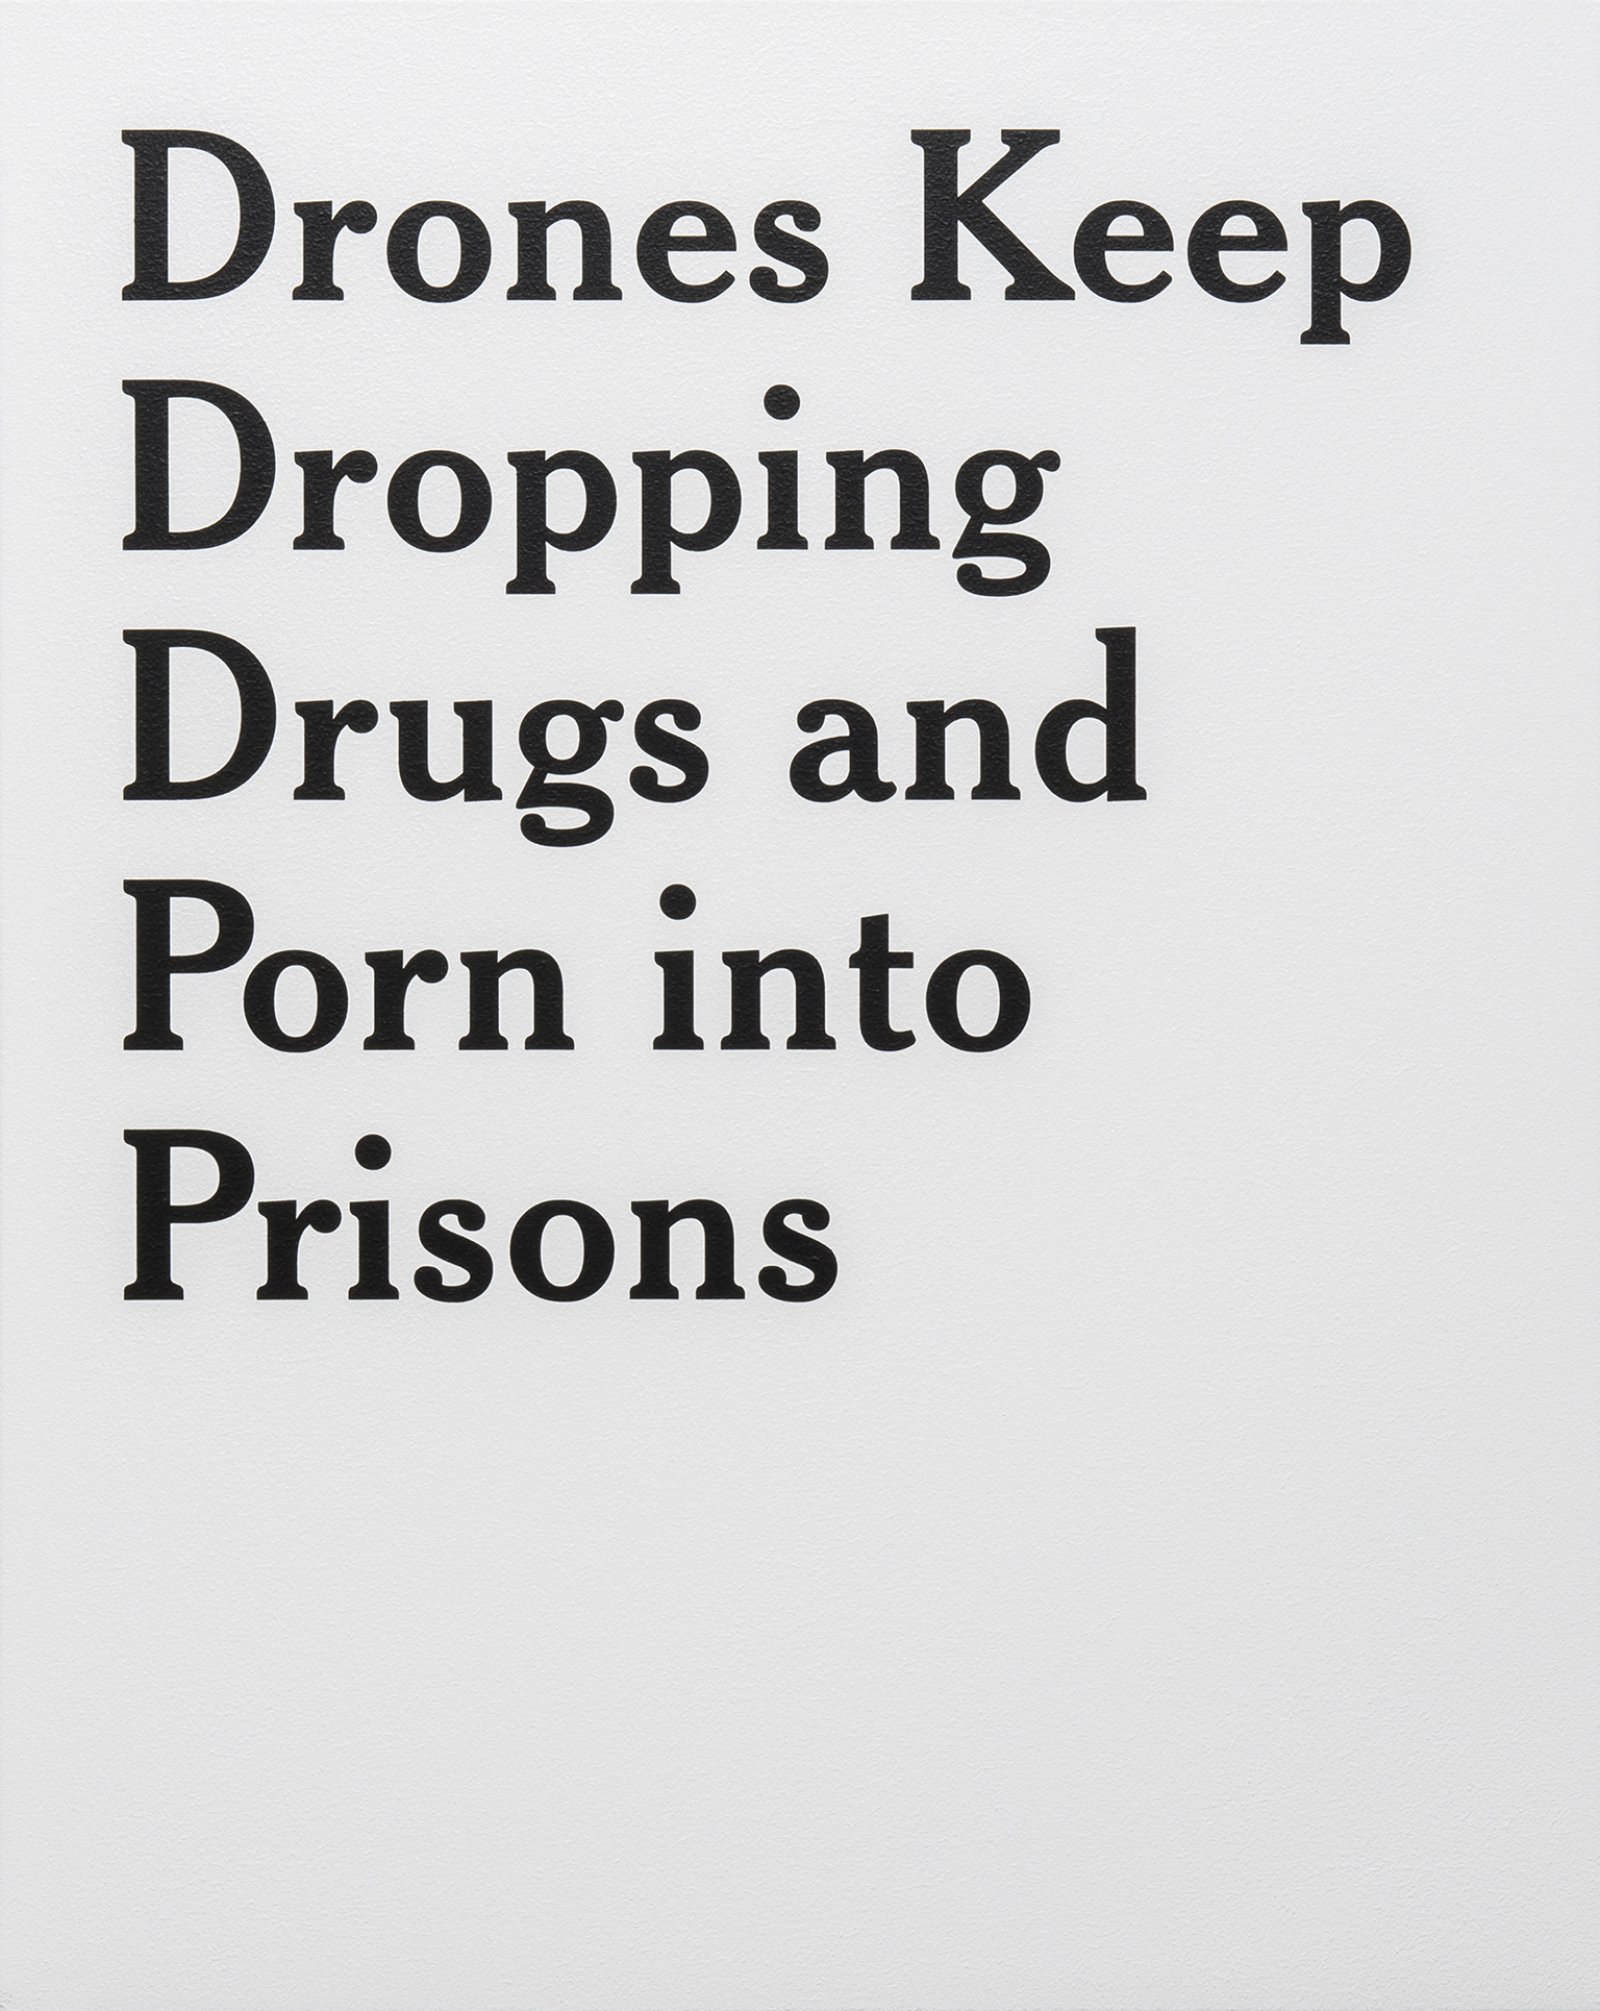 ​Ron Terada, Drones Keep Dropping Drugs and Porn into Prisons, 18 June 2017, 9:00 am, 2017, acrylic on canvas, 30 x 24 in. (76 x 61 cm) by Ron Terada